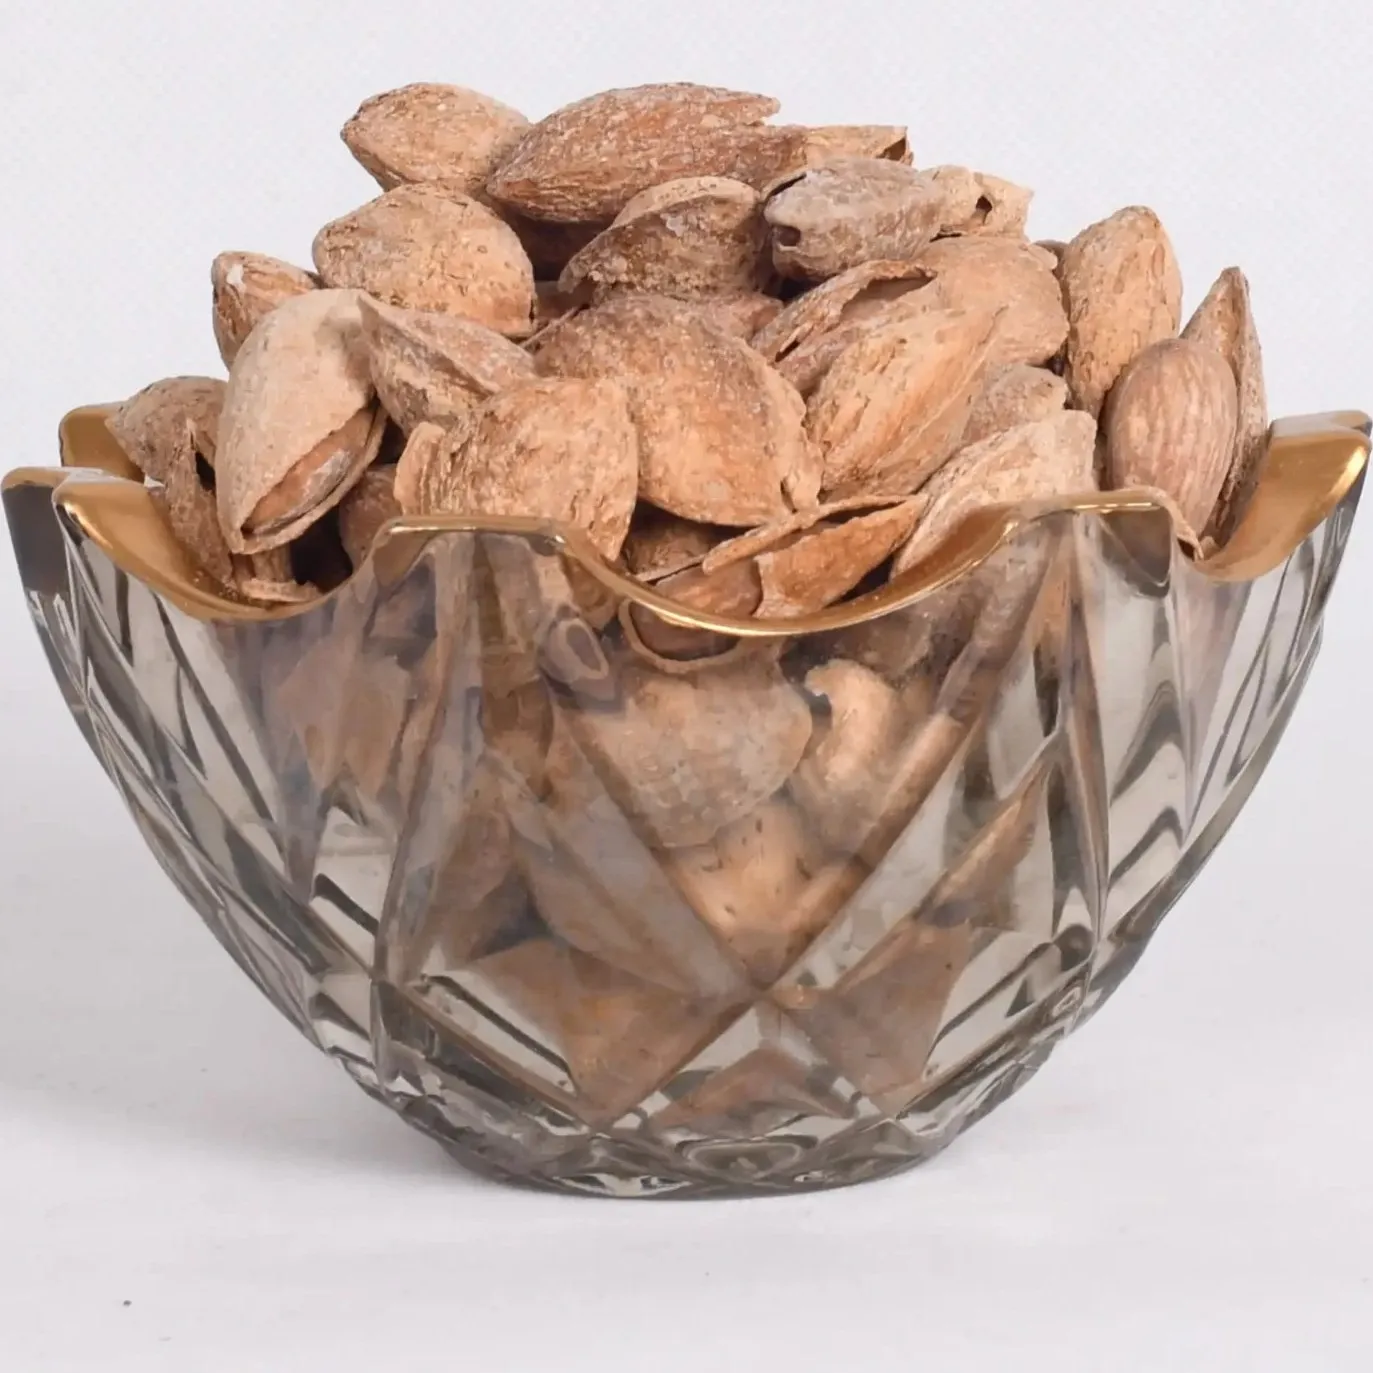 Price and buy roasted almonds vs raw + cheap sale